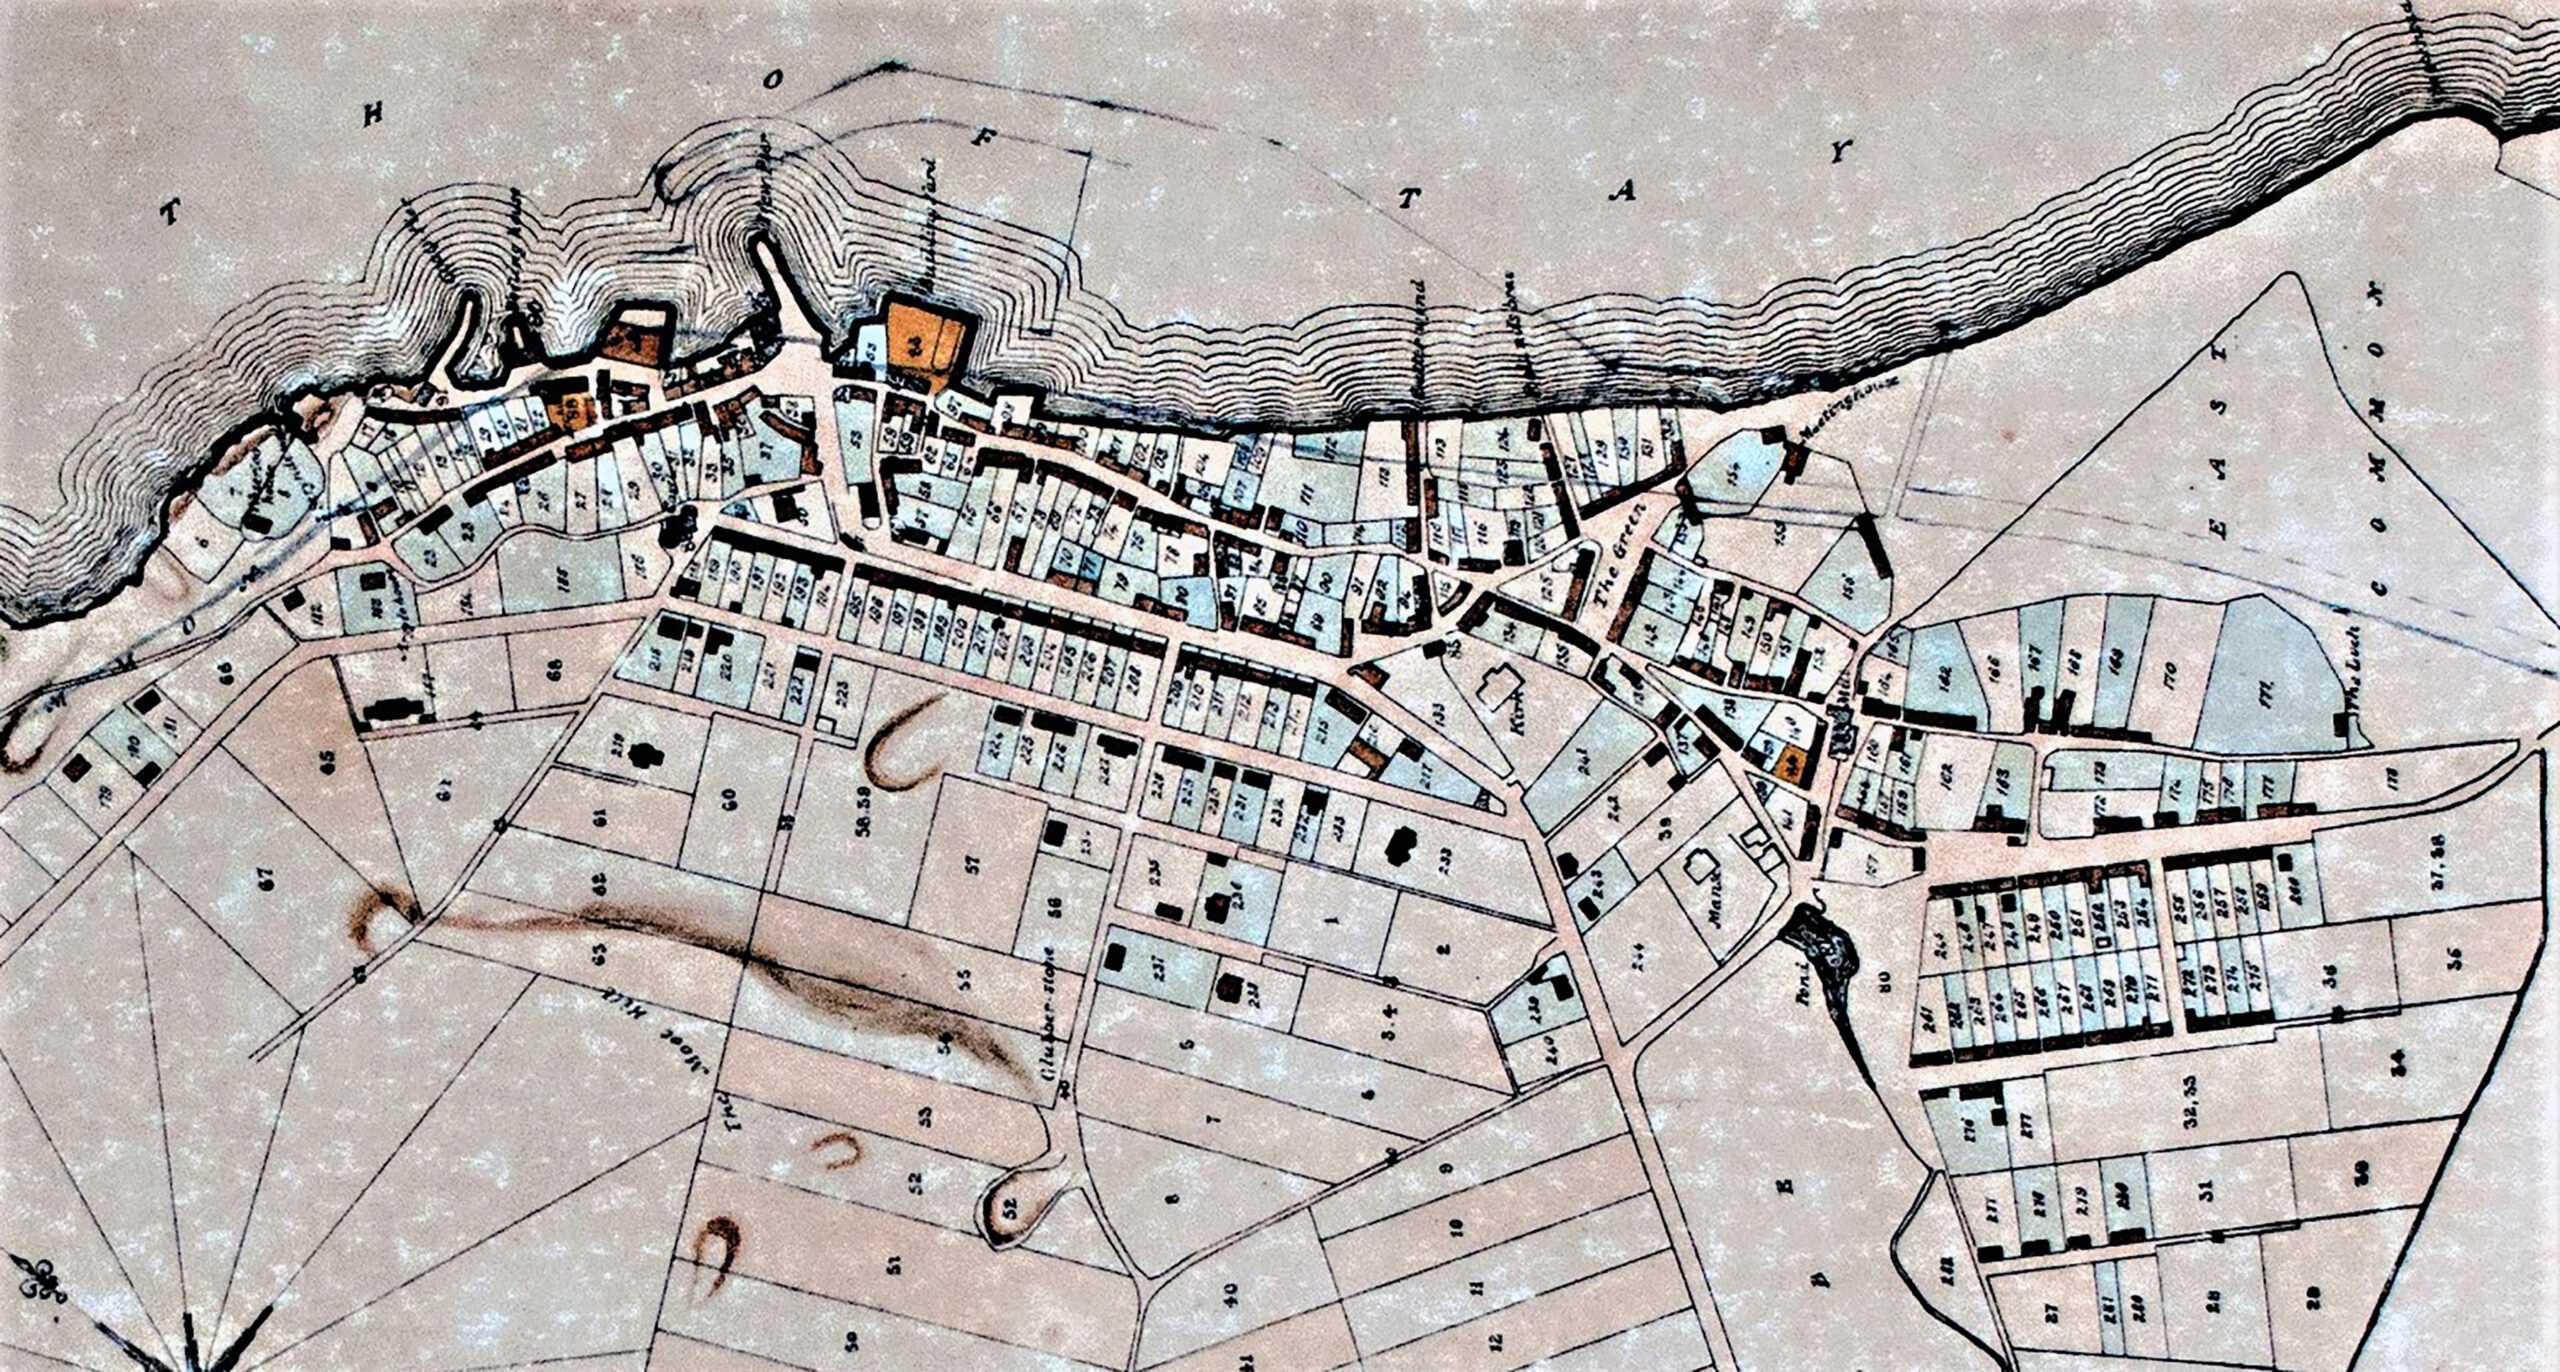 Tayport Heritage Trail - Board 23 - 1830s feu map showing church, surrounding area with pre-railway waterfront prior to 1843 disruption